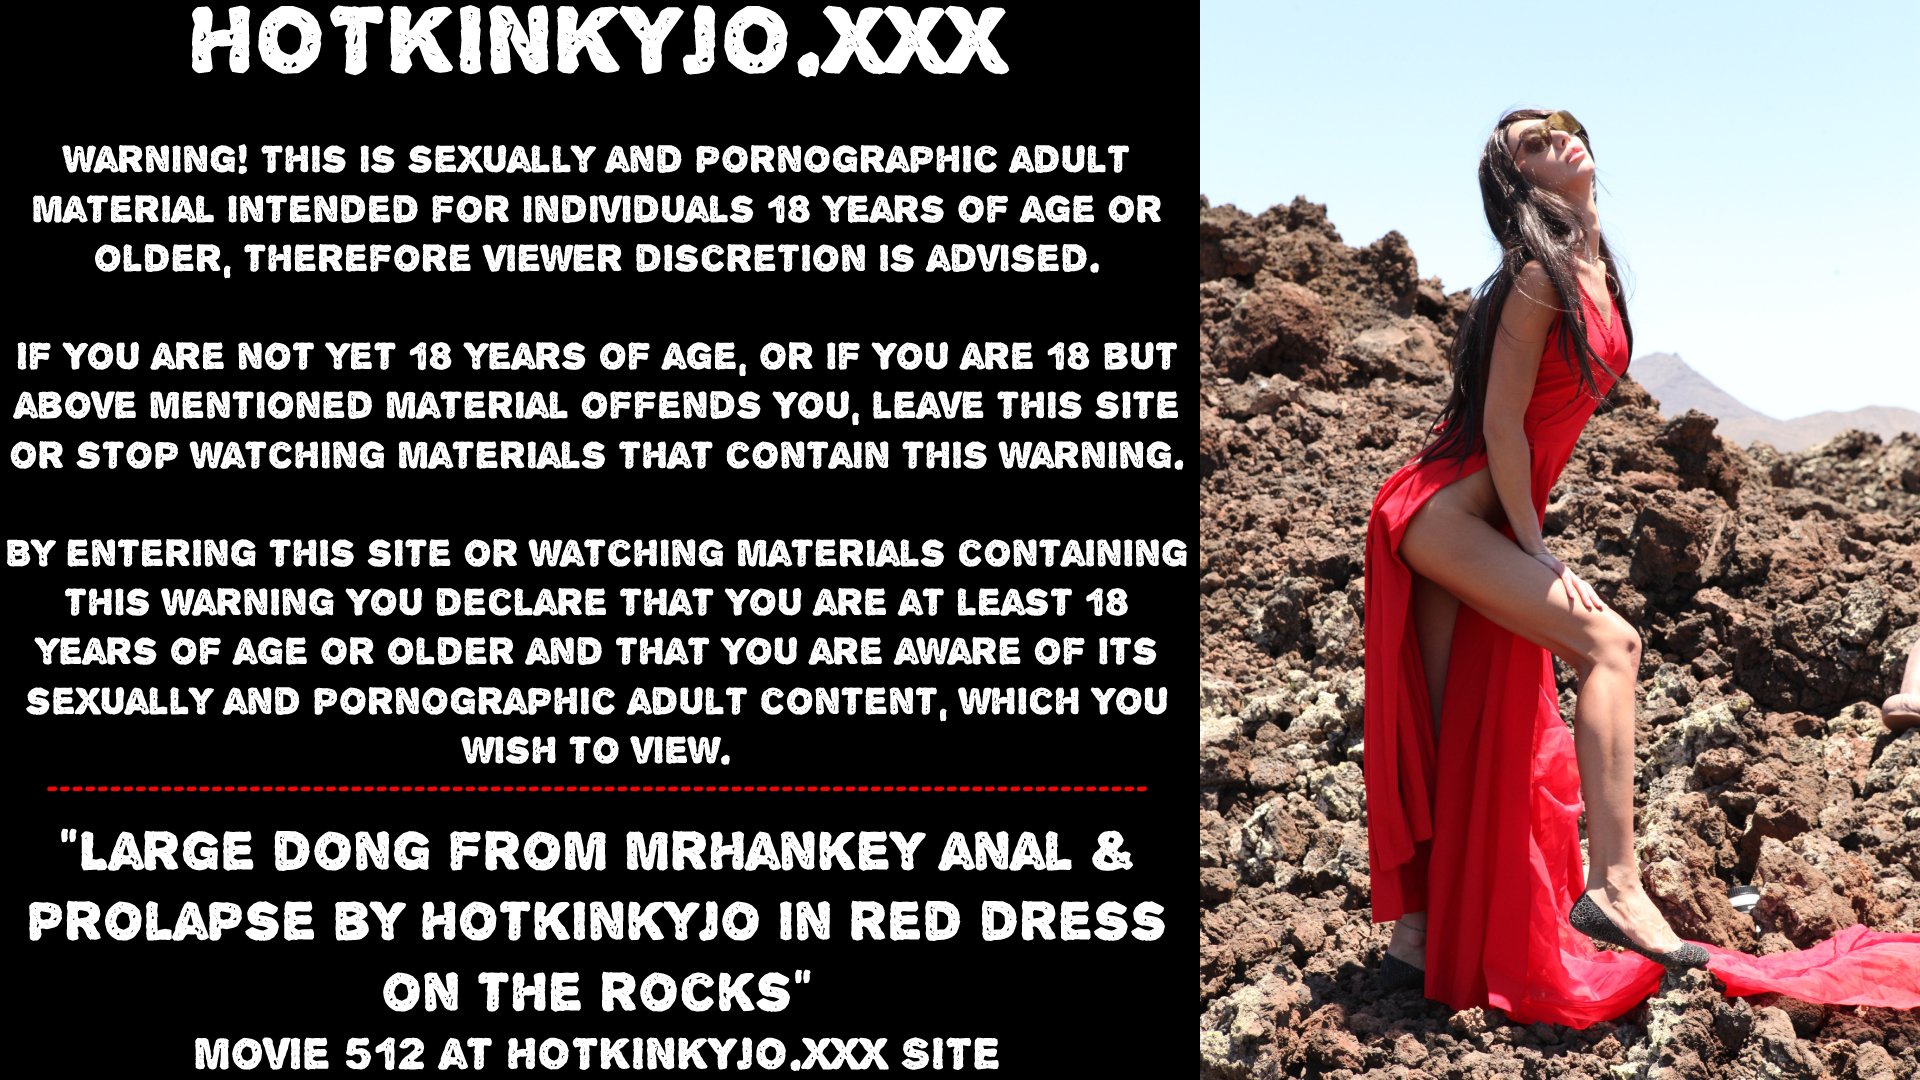 Large dong from mrHankey anal & prolapse by Hotkinkyjo in red dress on the